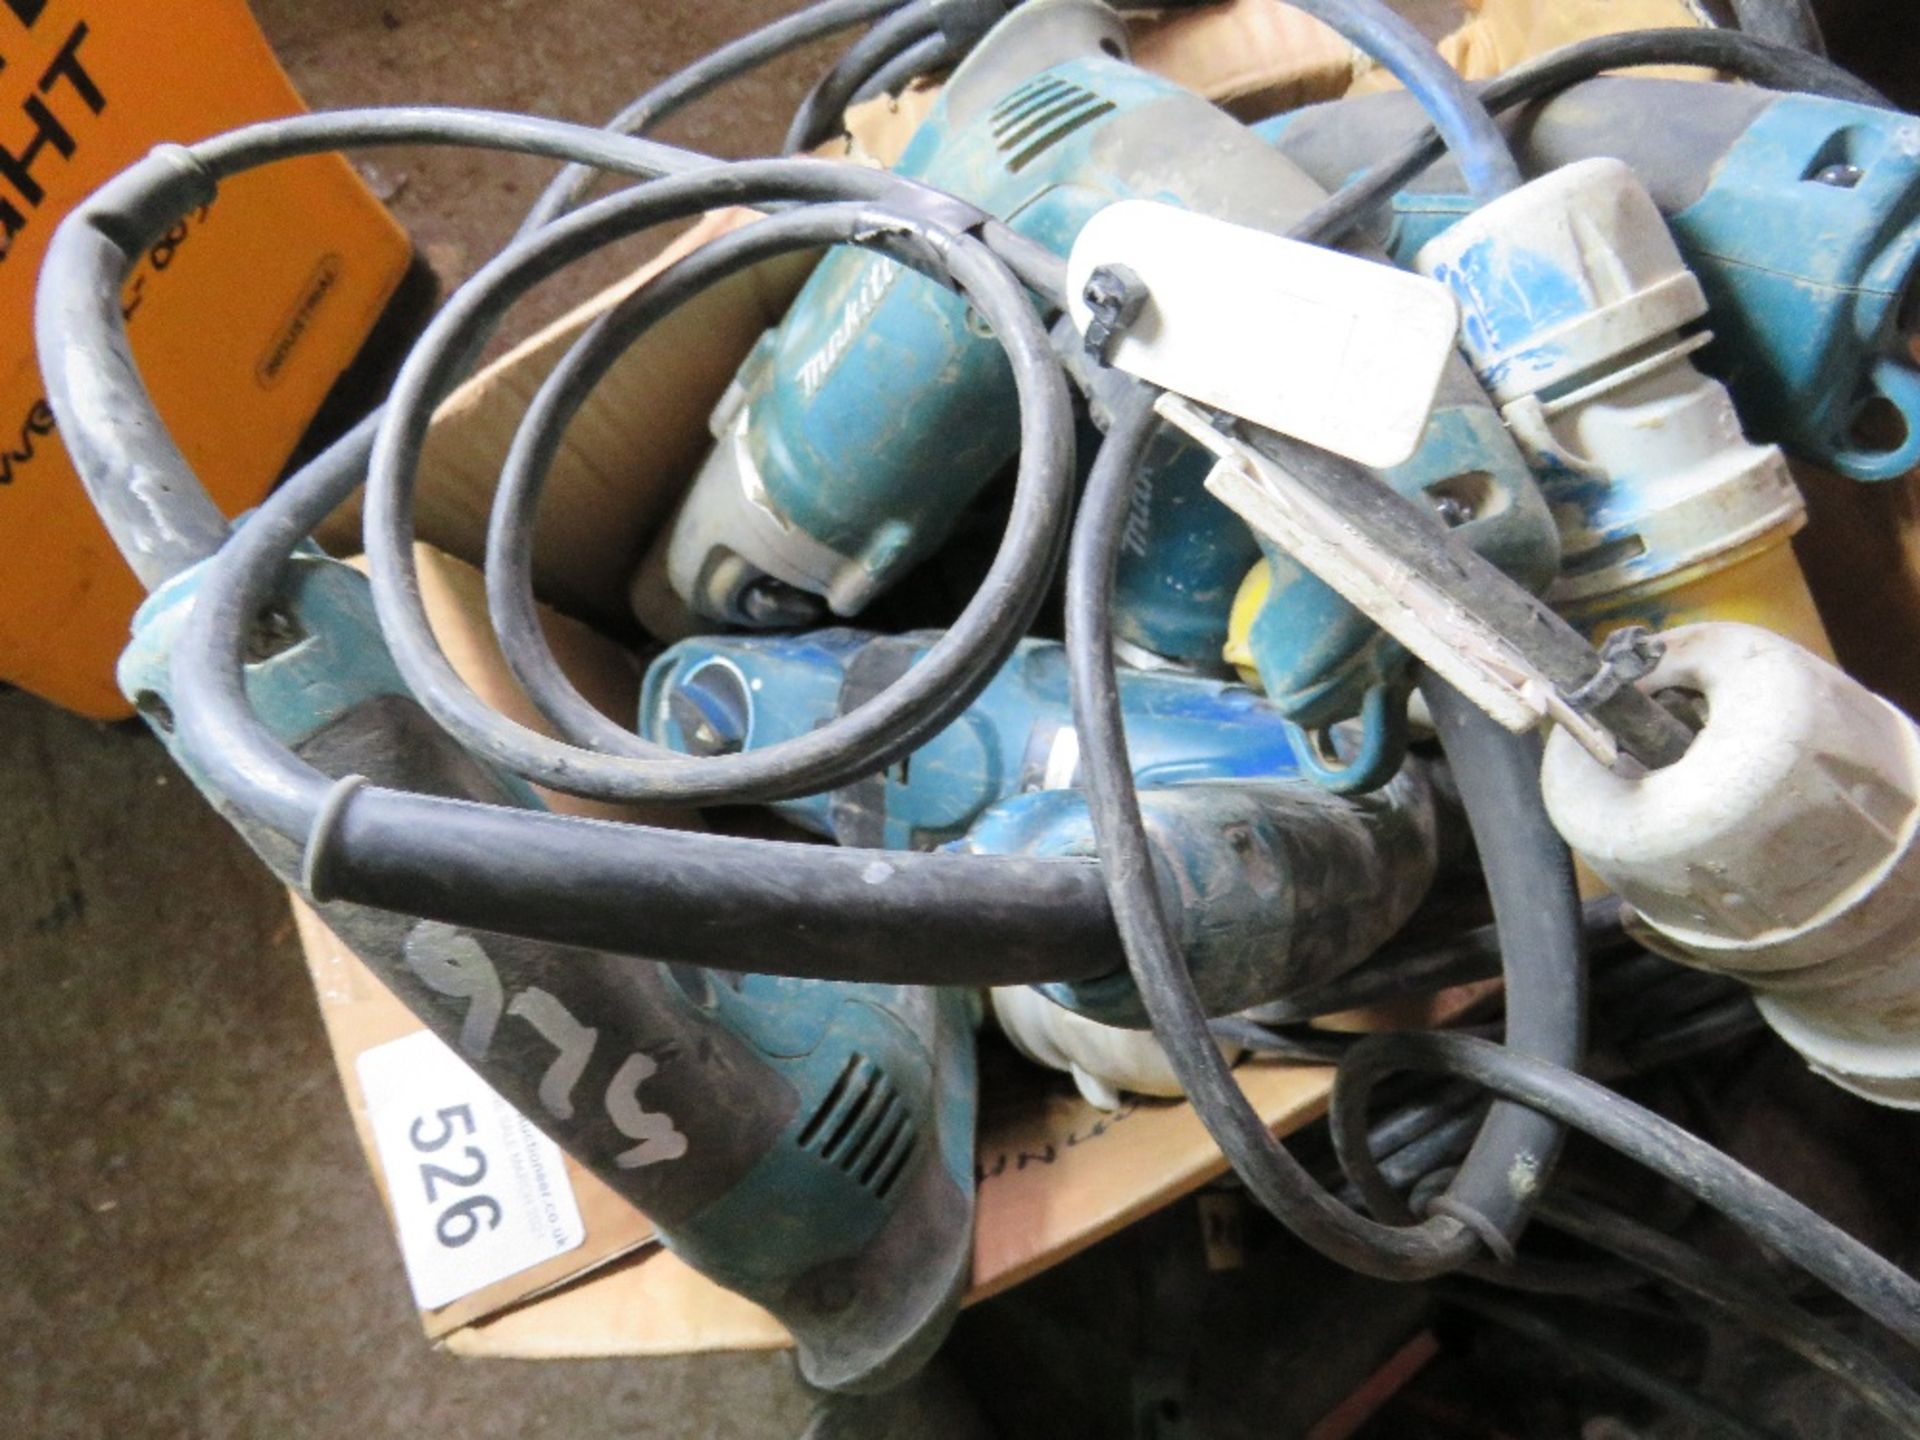 5 X SDS 110VOLT DRILLS. UNTESTED, CONDITION UNKNOWN. - Image 2 of 2